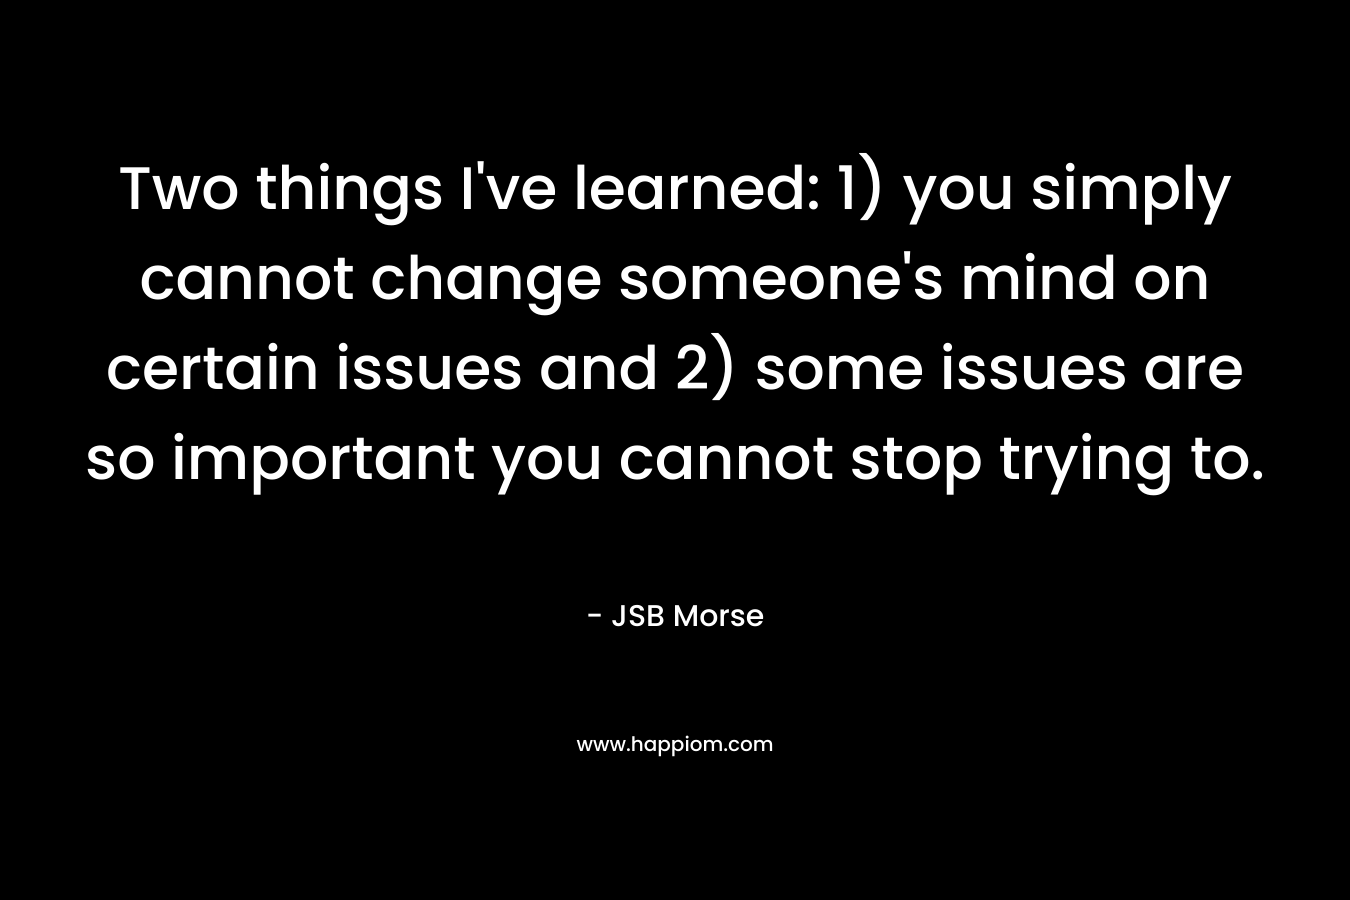 Two things I've learned: 1) you simply cannot change someone's mind on certain issues and 2) some issues are so important you cannot stop trying to.